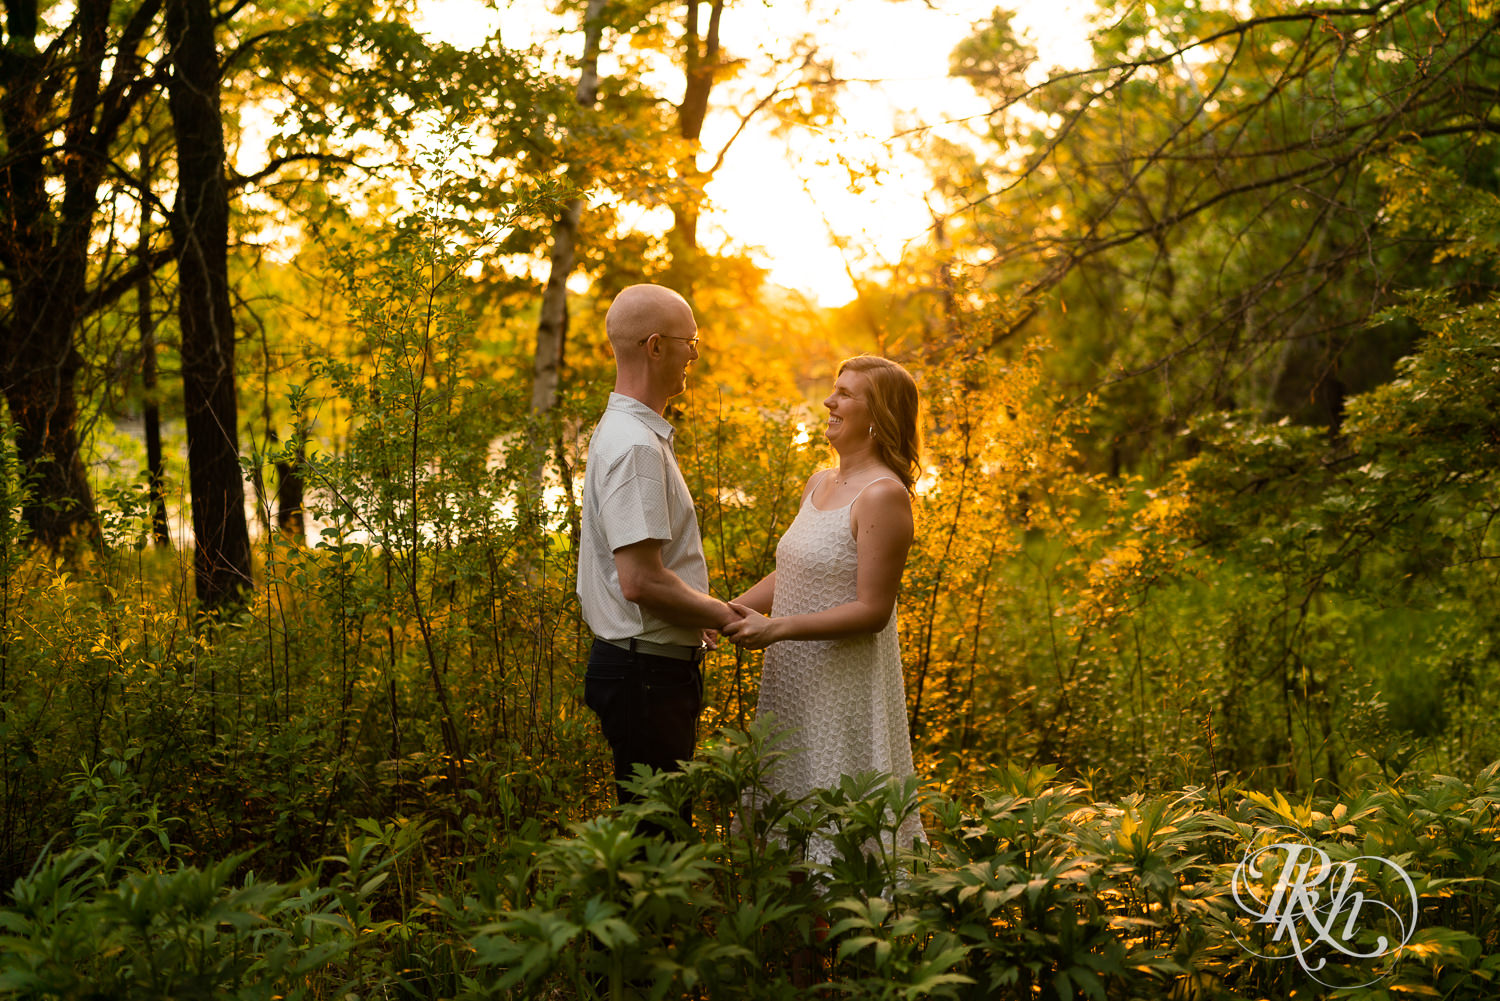 Man in white shirt and blonde woman in white dress and denim smile at sunset in Lebanon Hills Regional Park in Eagan, Minnesota.